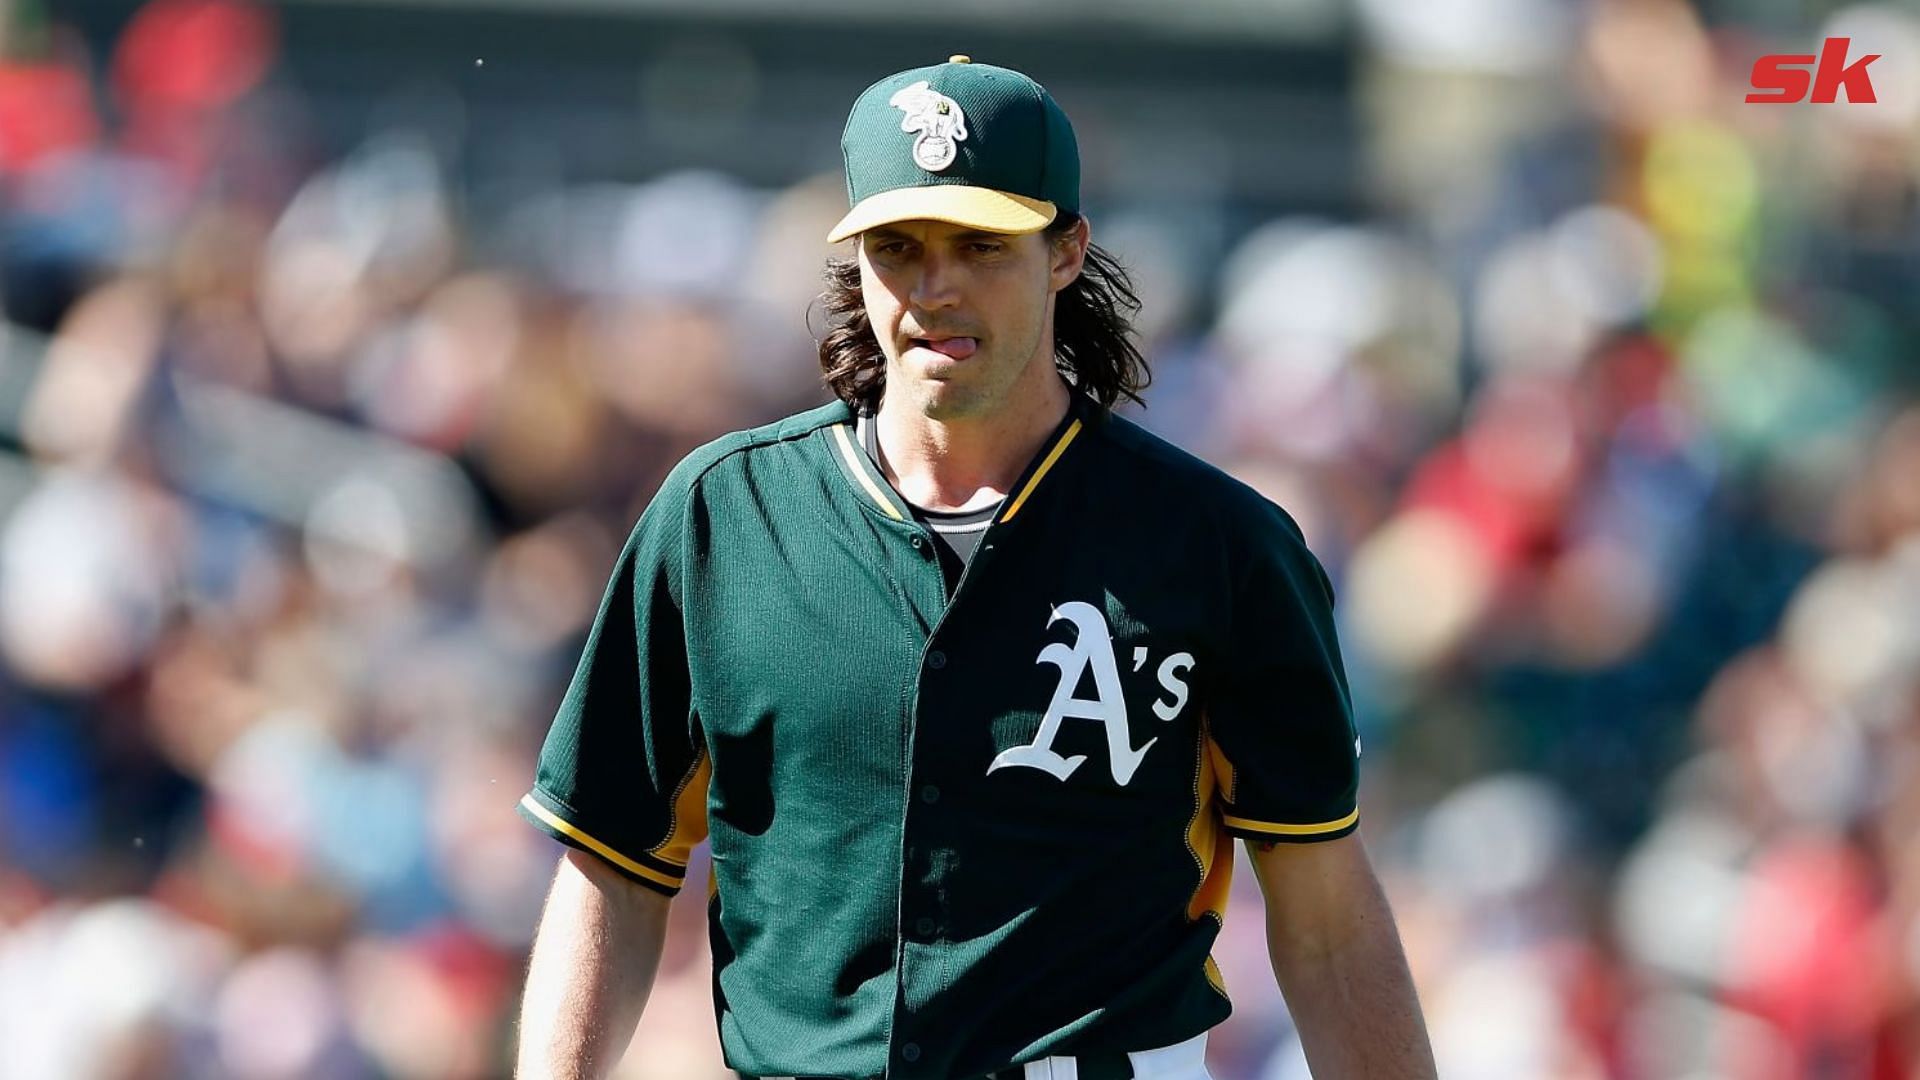 Oakland A's legend Barry Zito once resorted to smoking weed to